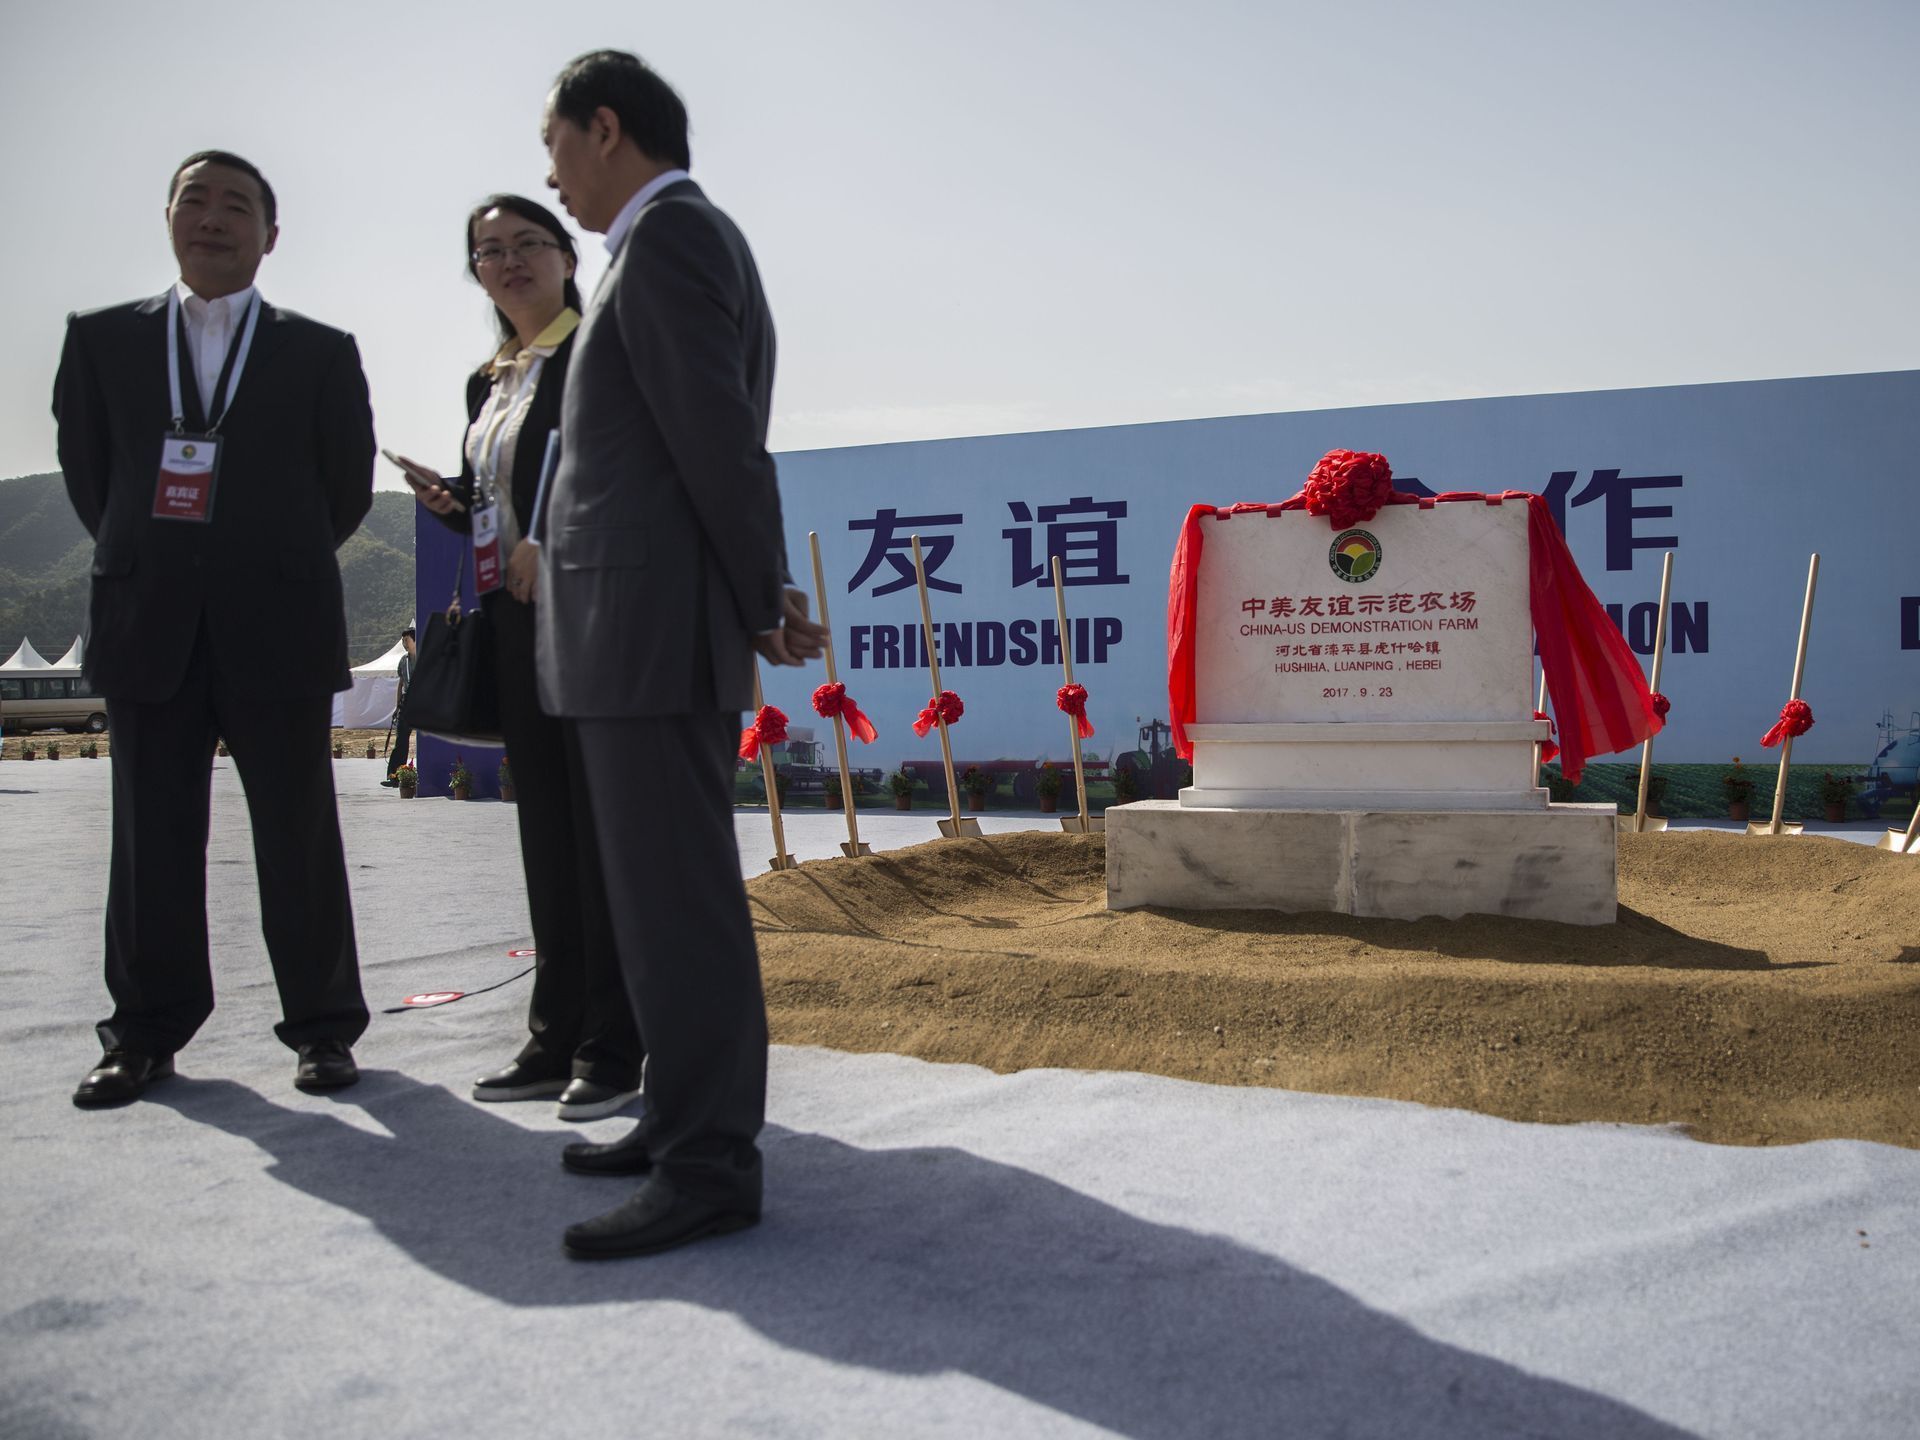 Representatives from Chinese and Iowan agriculture industries attend the groundbreaking ceremony for the China-U.S. Demonstration Farm on Saturday, Sept. 23, 2017, in Luanping County, Hebei, China. The farm is being built based on the farm that Chinese President Xi Jingping visited in Iowa in 2012. Image by Kelsey Kremer.